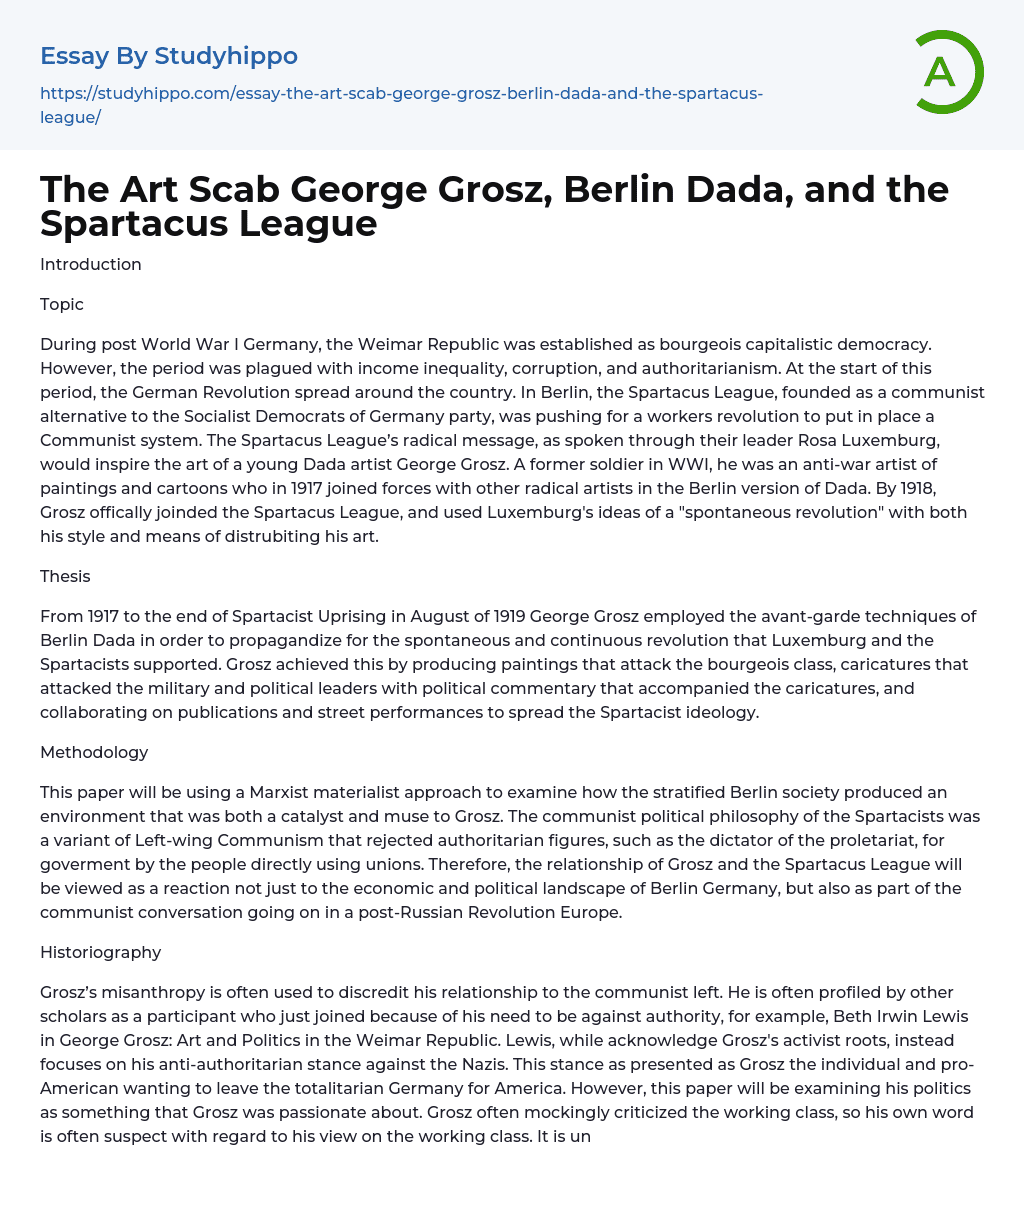 The Art Scab George Grosz, Berlin Dada, and the Spartacus League Essay Example